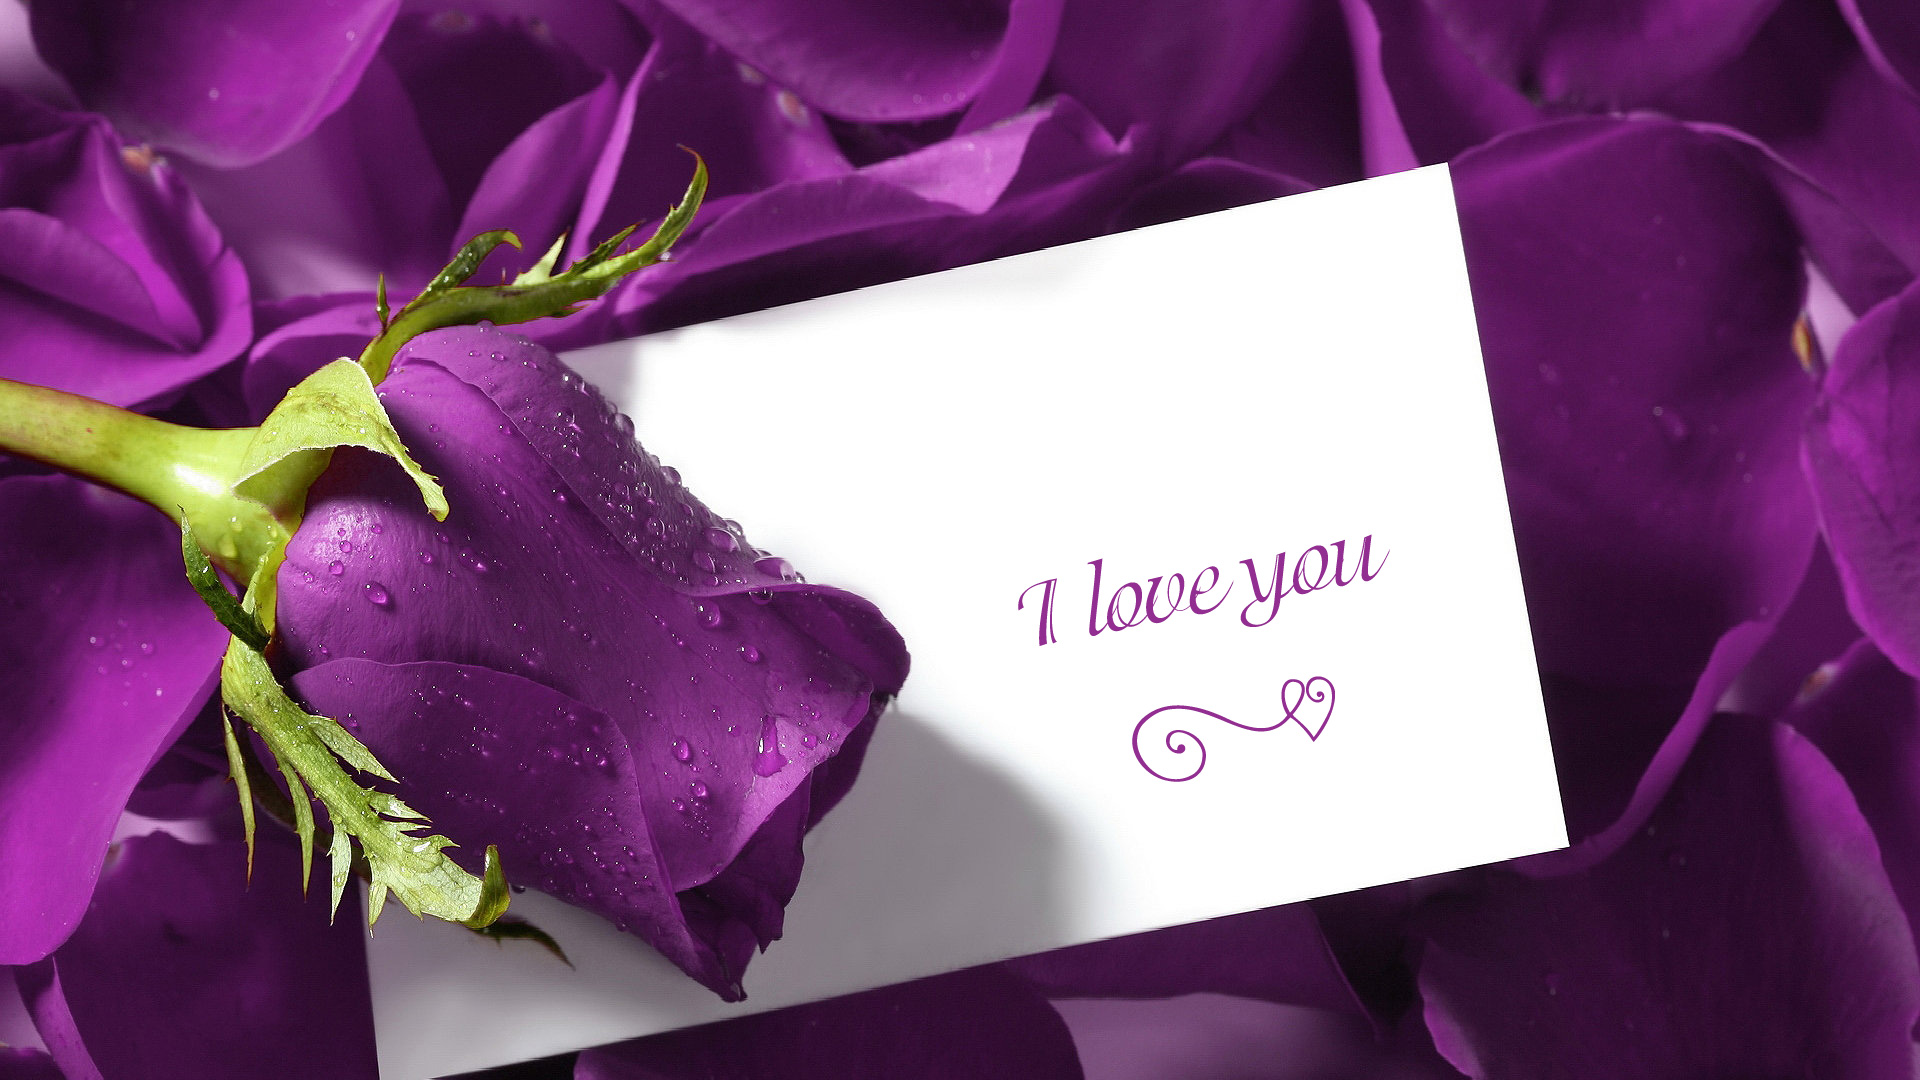 Cool Valentine Flowers And Letters Wallpaper B High